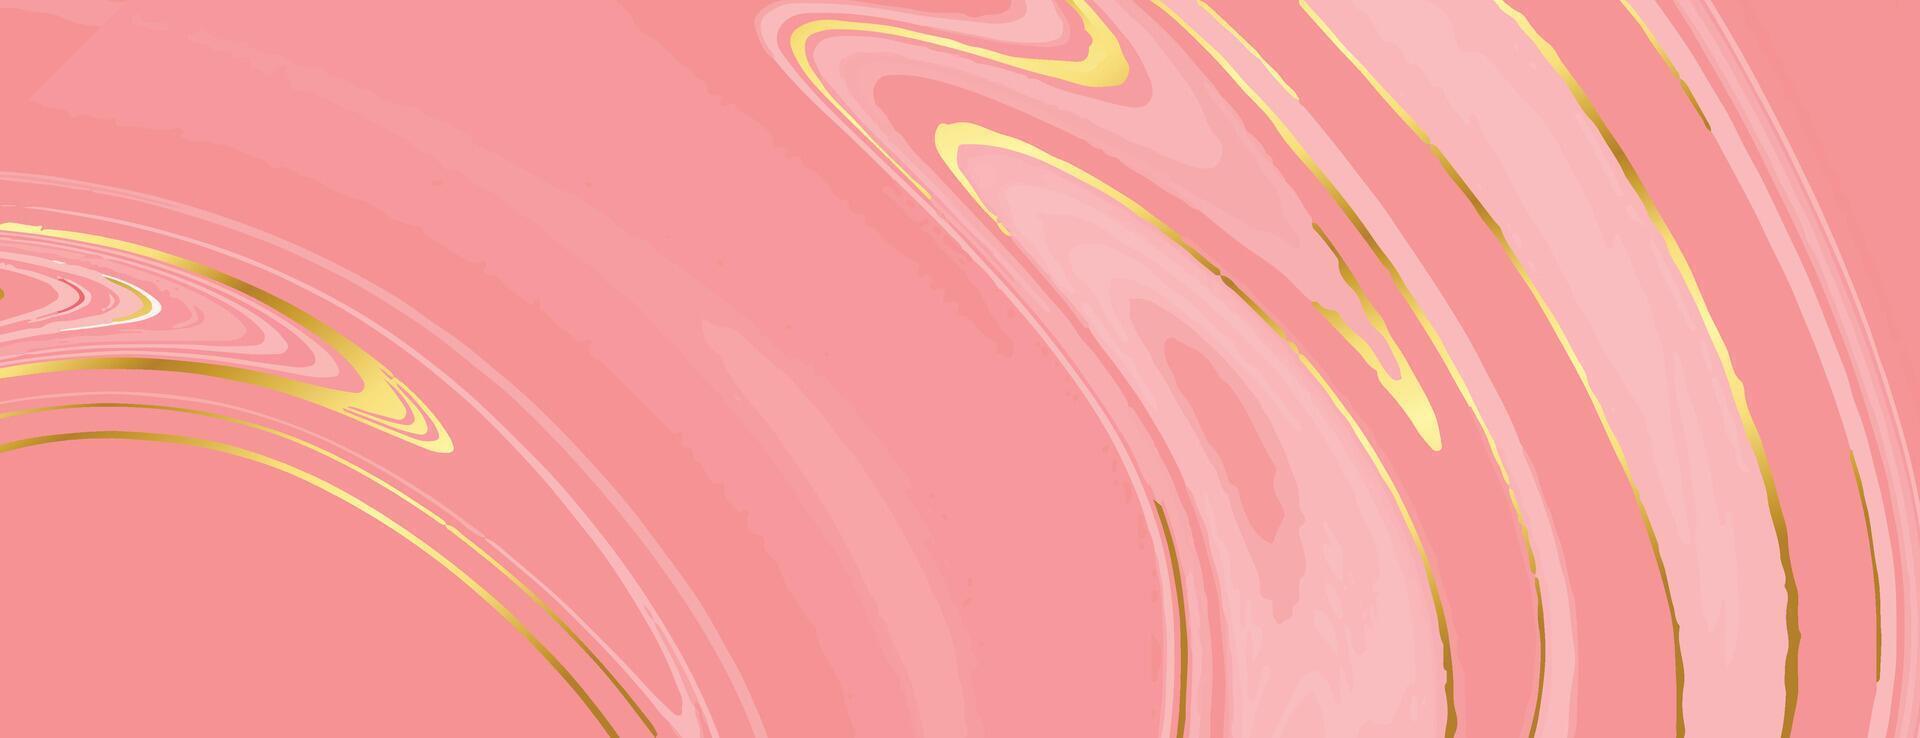 pink and golden marble texture background vector